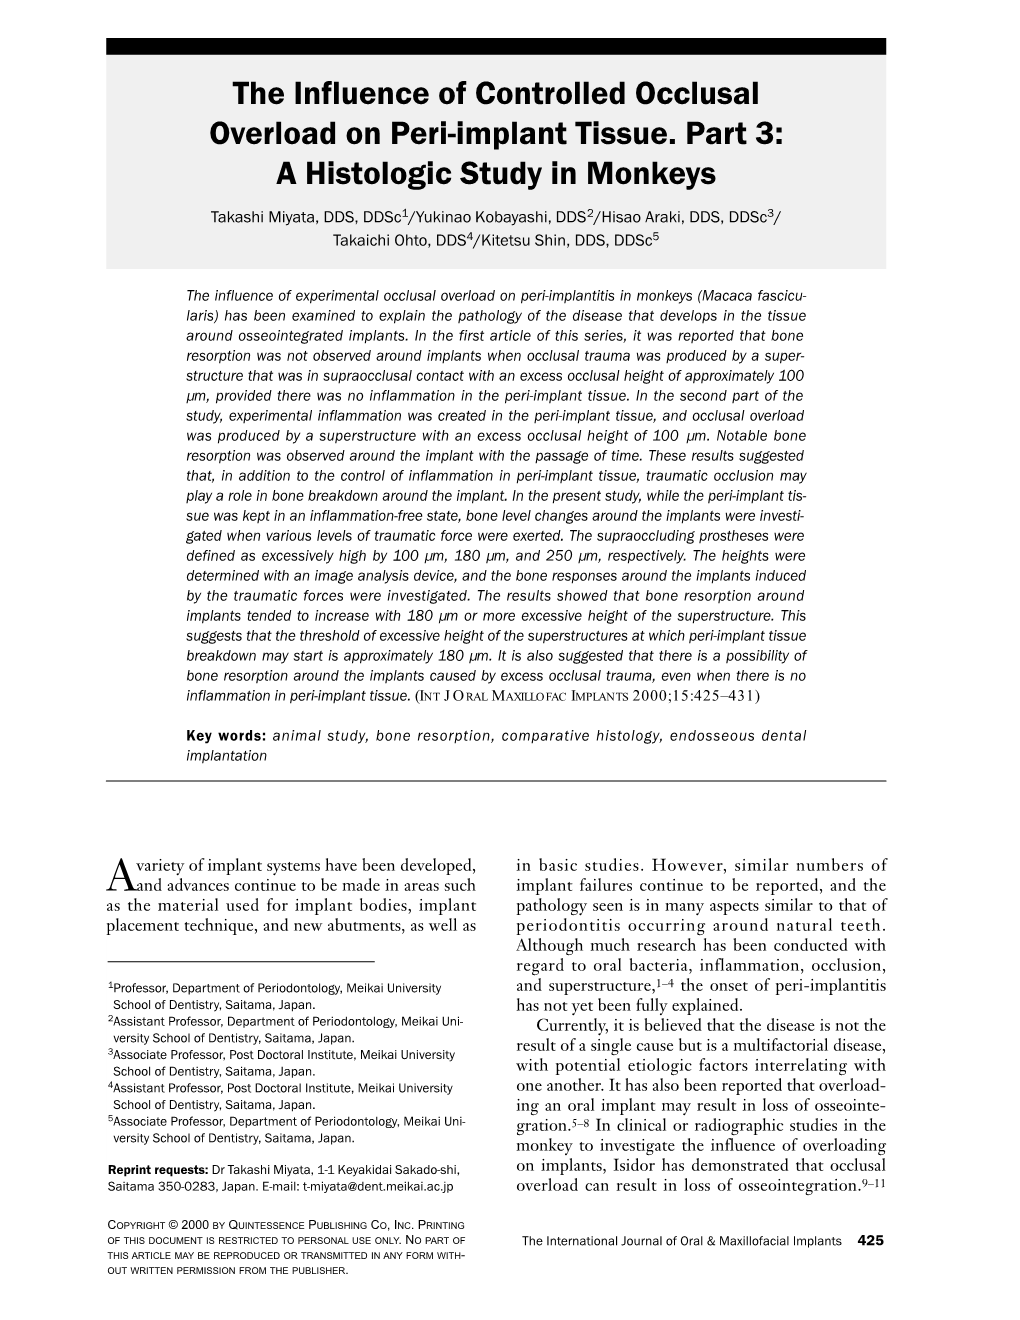 The Influence of Controlled Occlusal Overload on Peri-Implant Tissue. Part 3: a Histologic Study in Monkeys